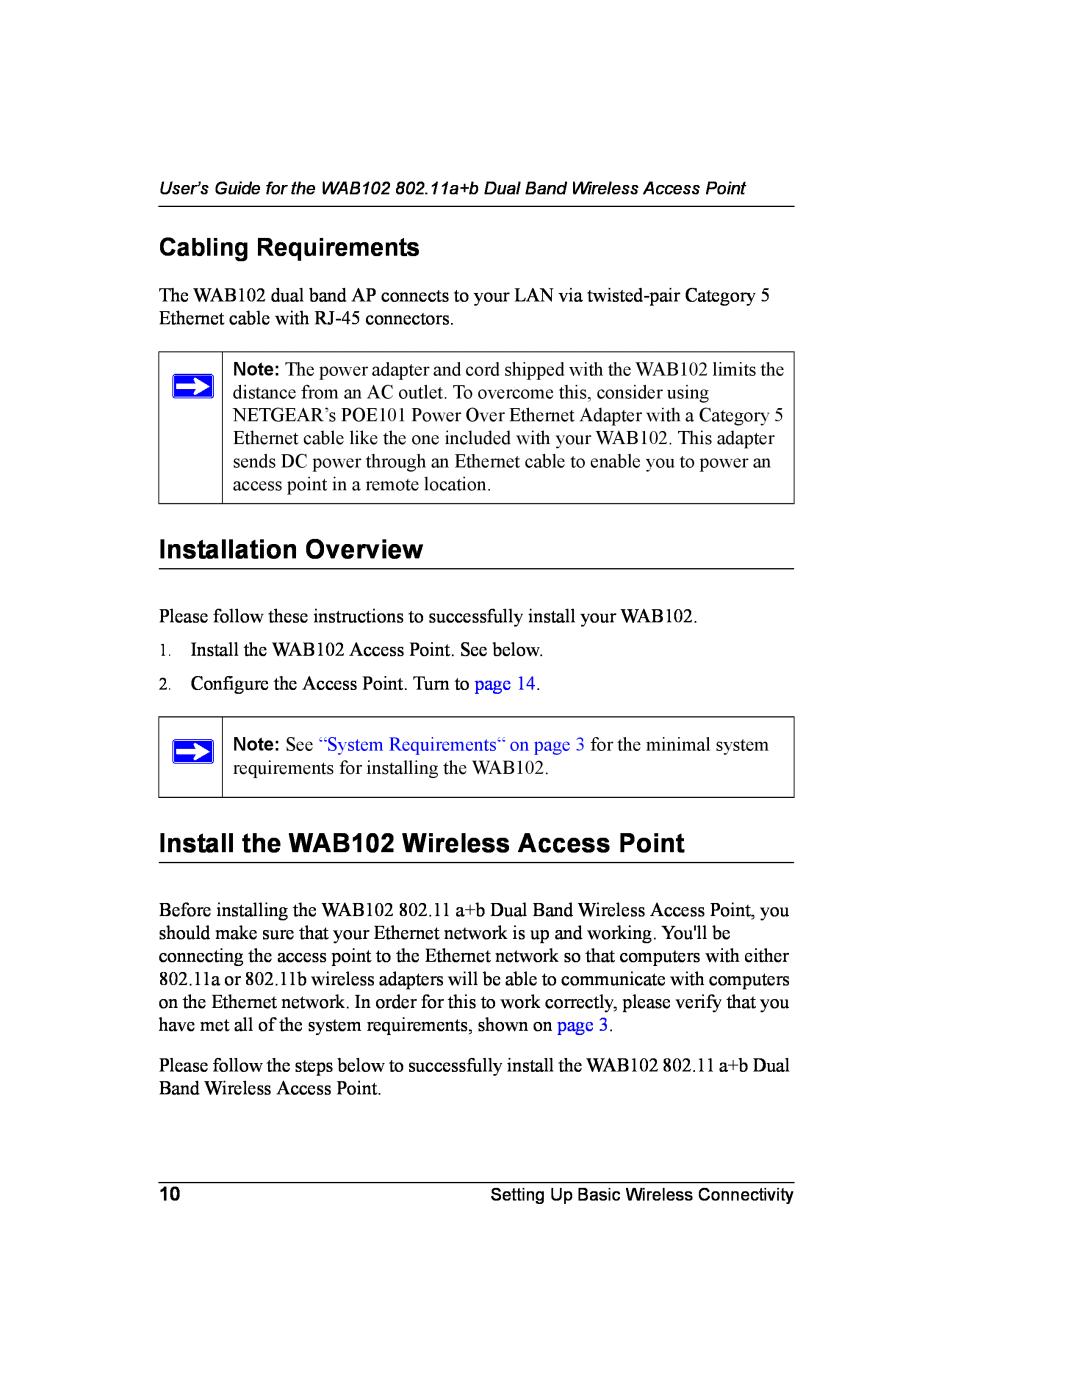 NETGEAR manual Installation Overview, Install the WAB102 Wireless Access Point, Cabling Requirements 